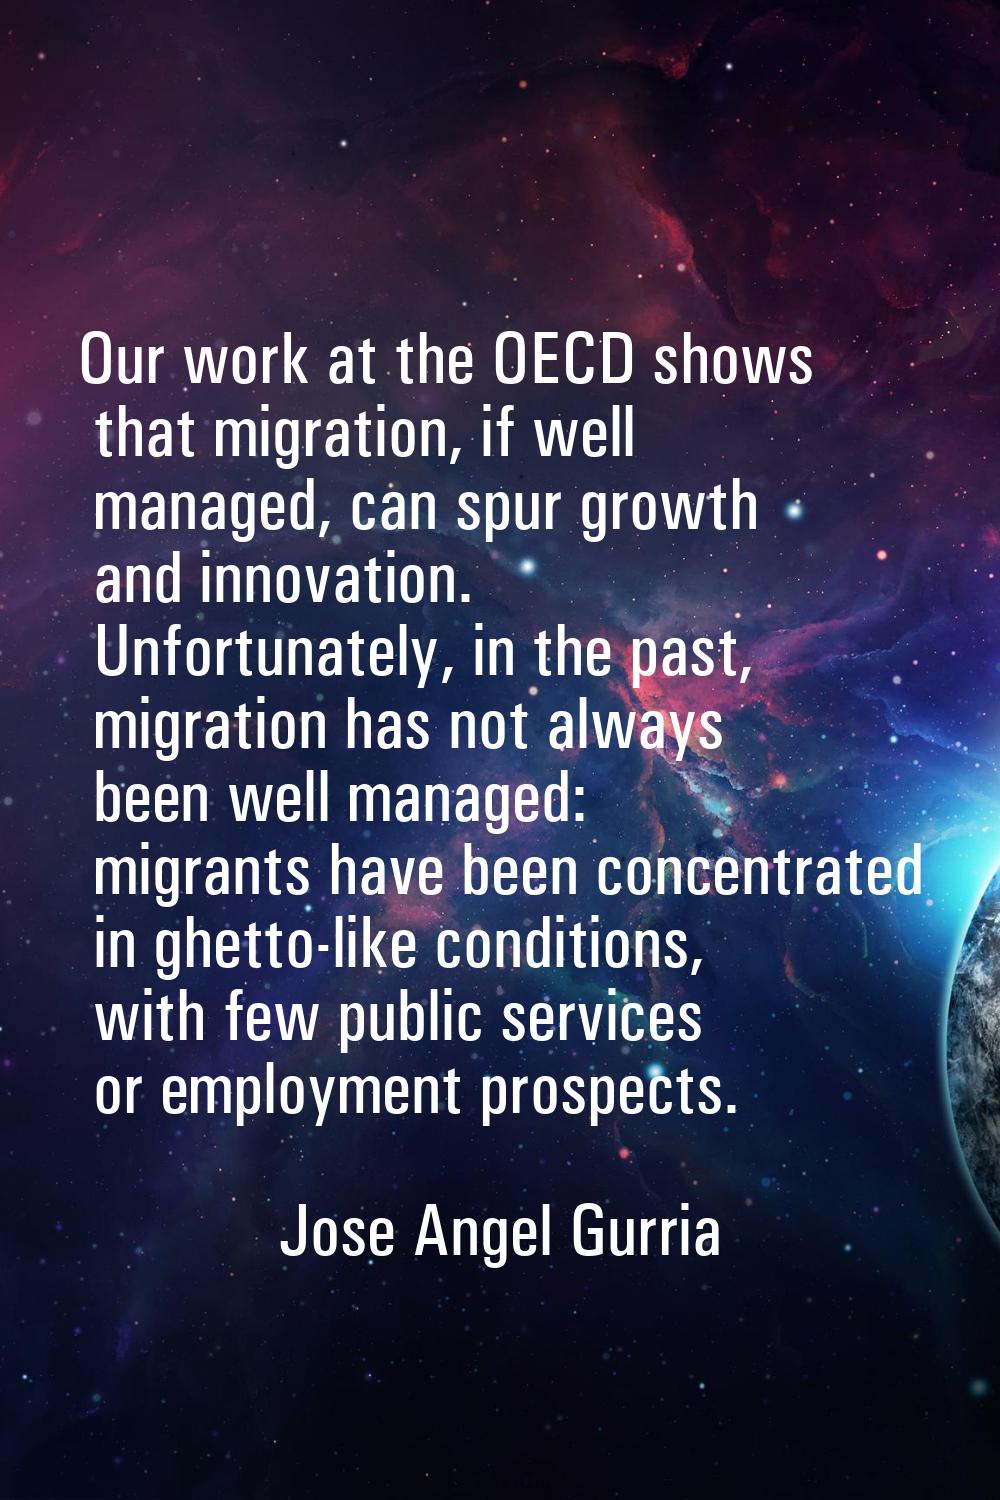 Our work at the OECD shows that migration, if well managed, can spur growth and innovation. Unfortu